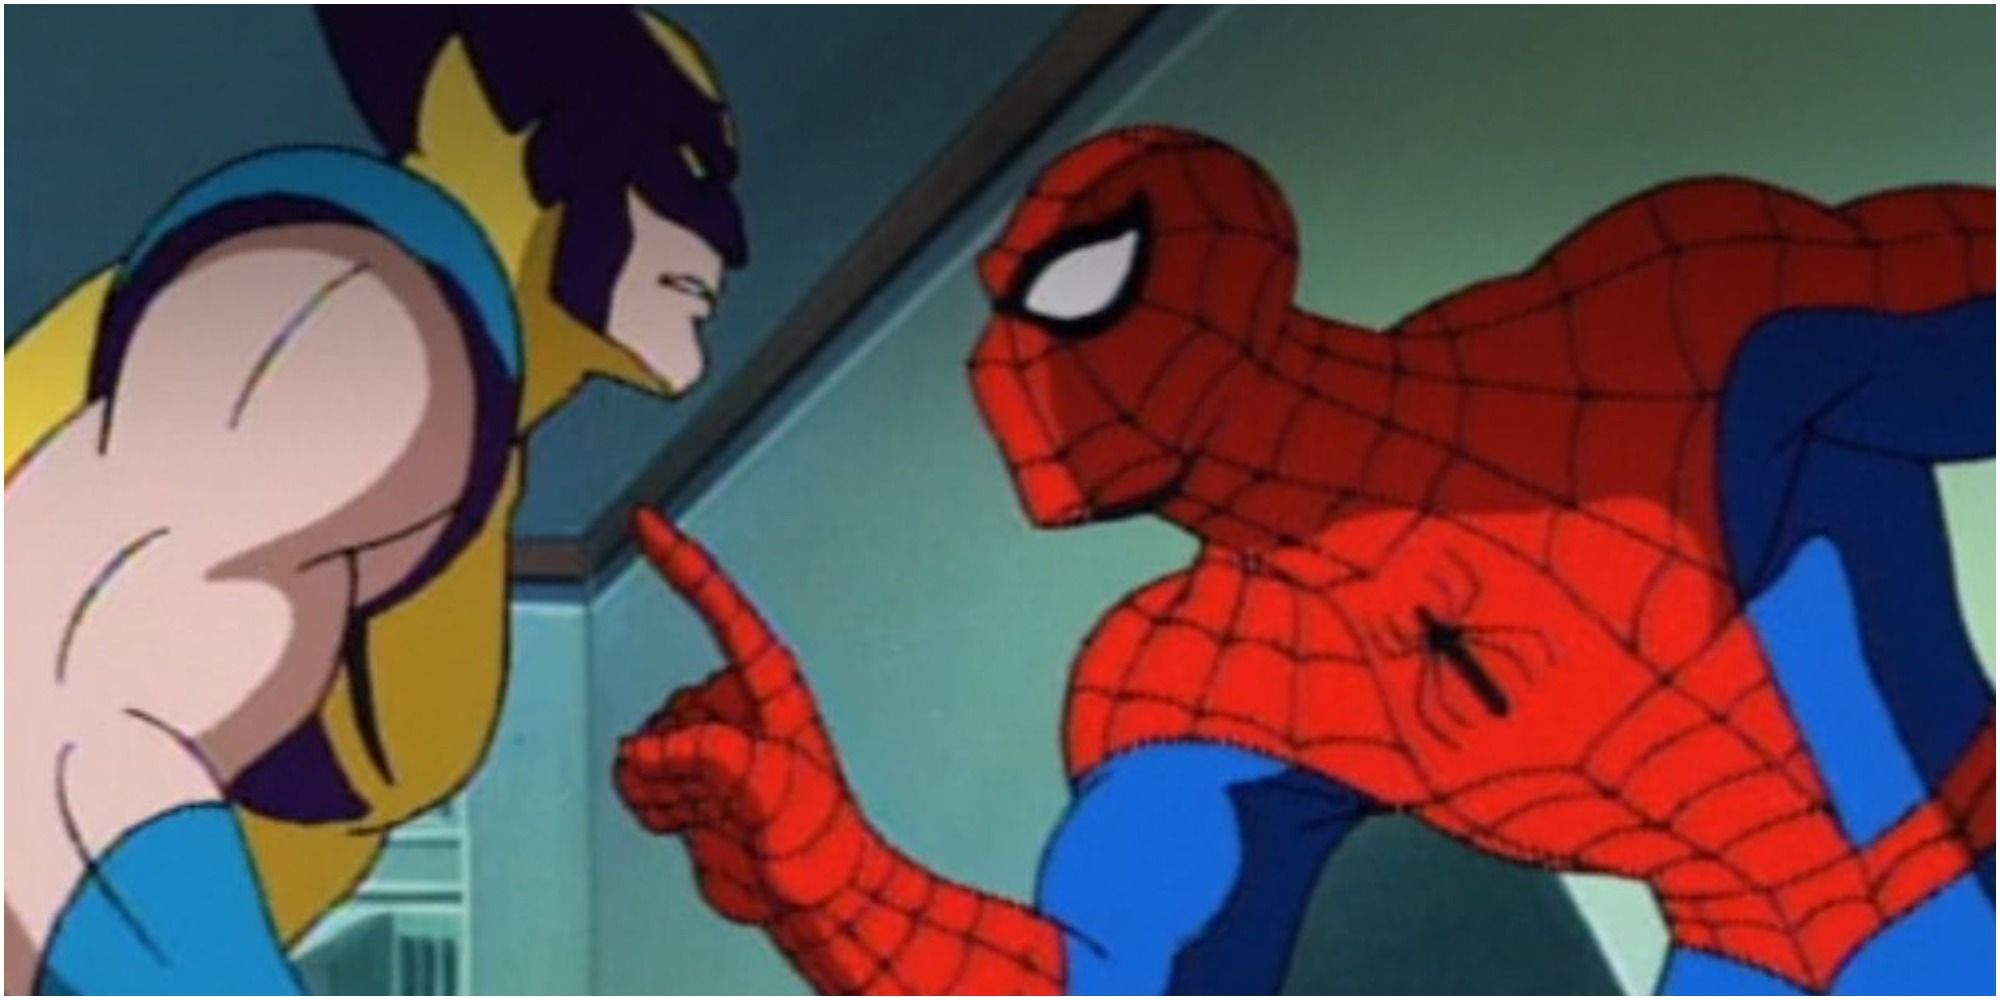 Spider-Man and Wolverine have a disagreement